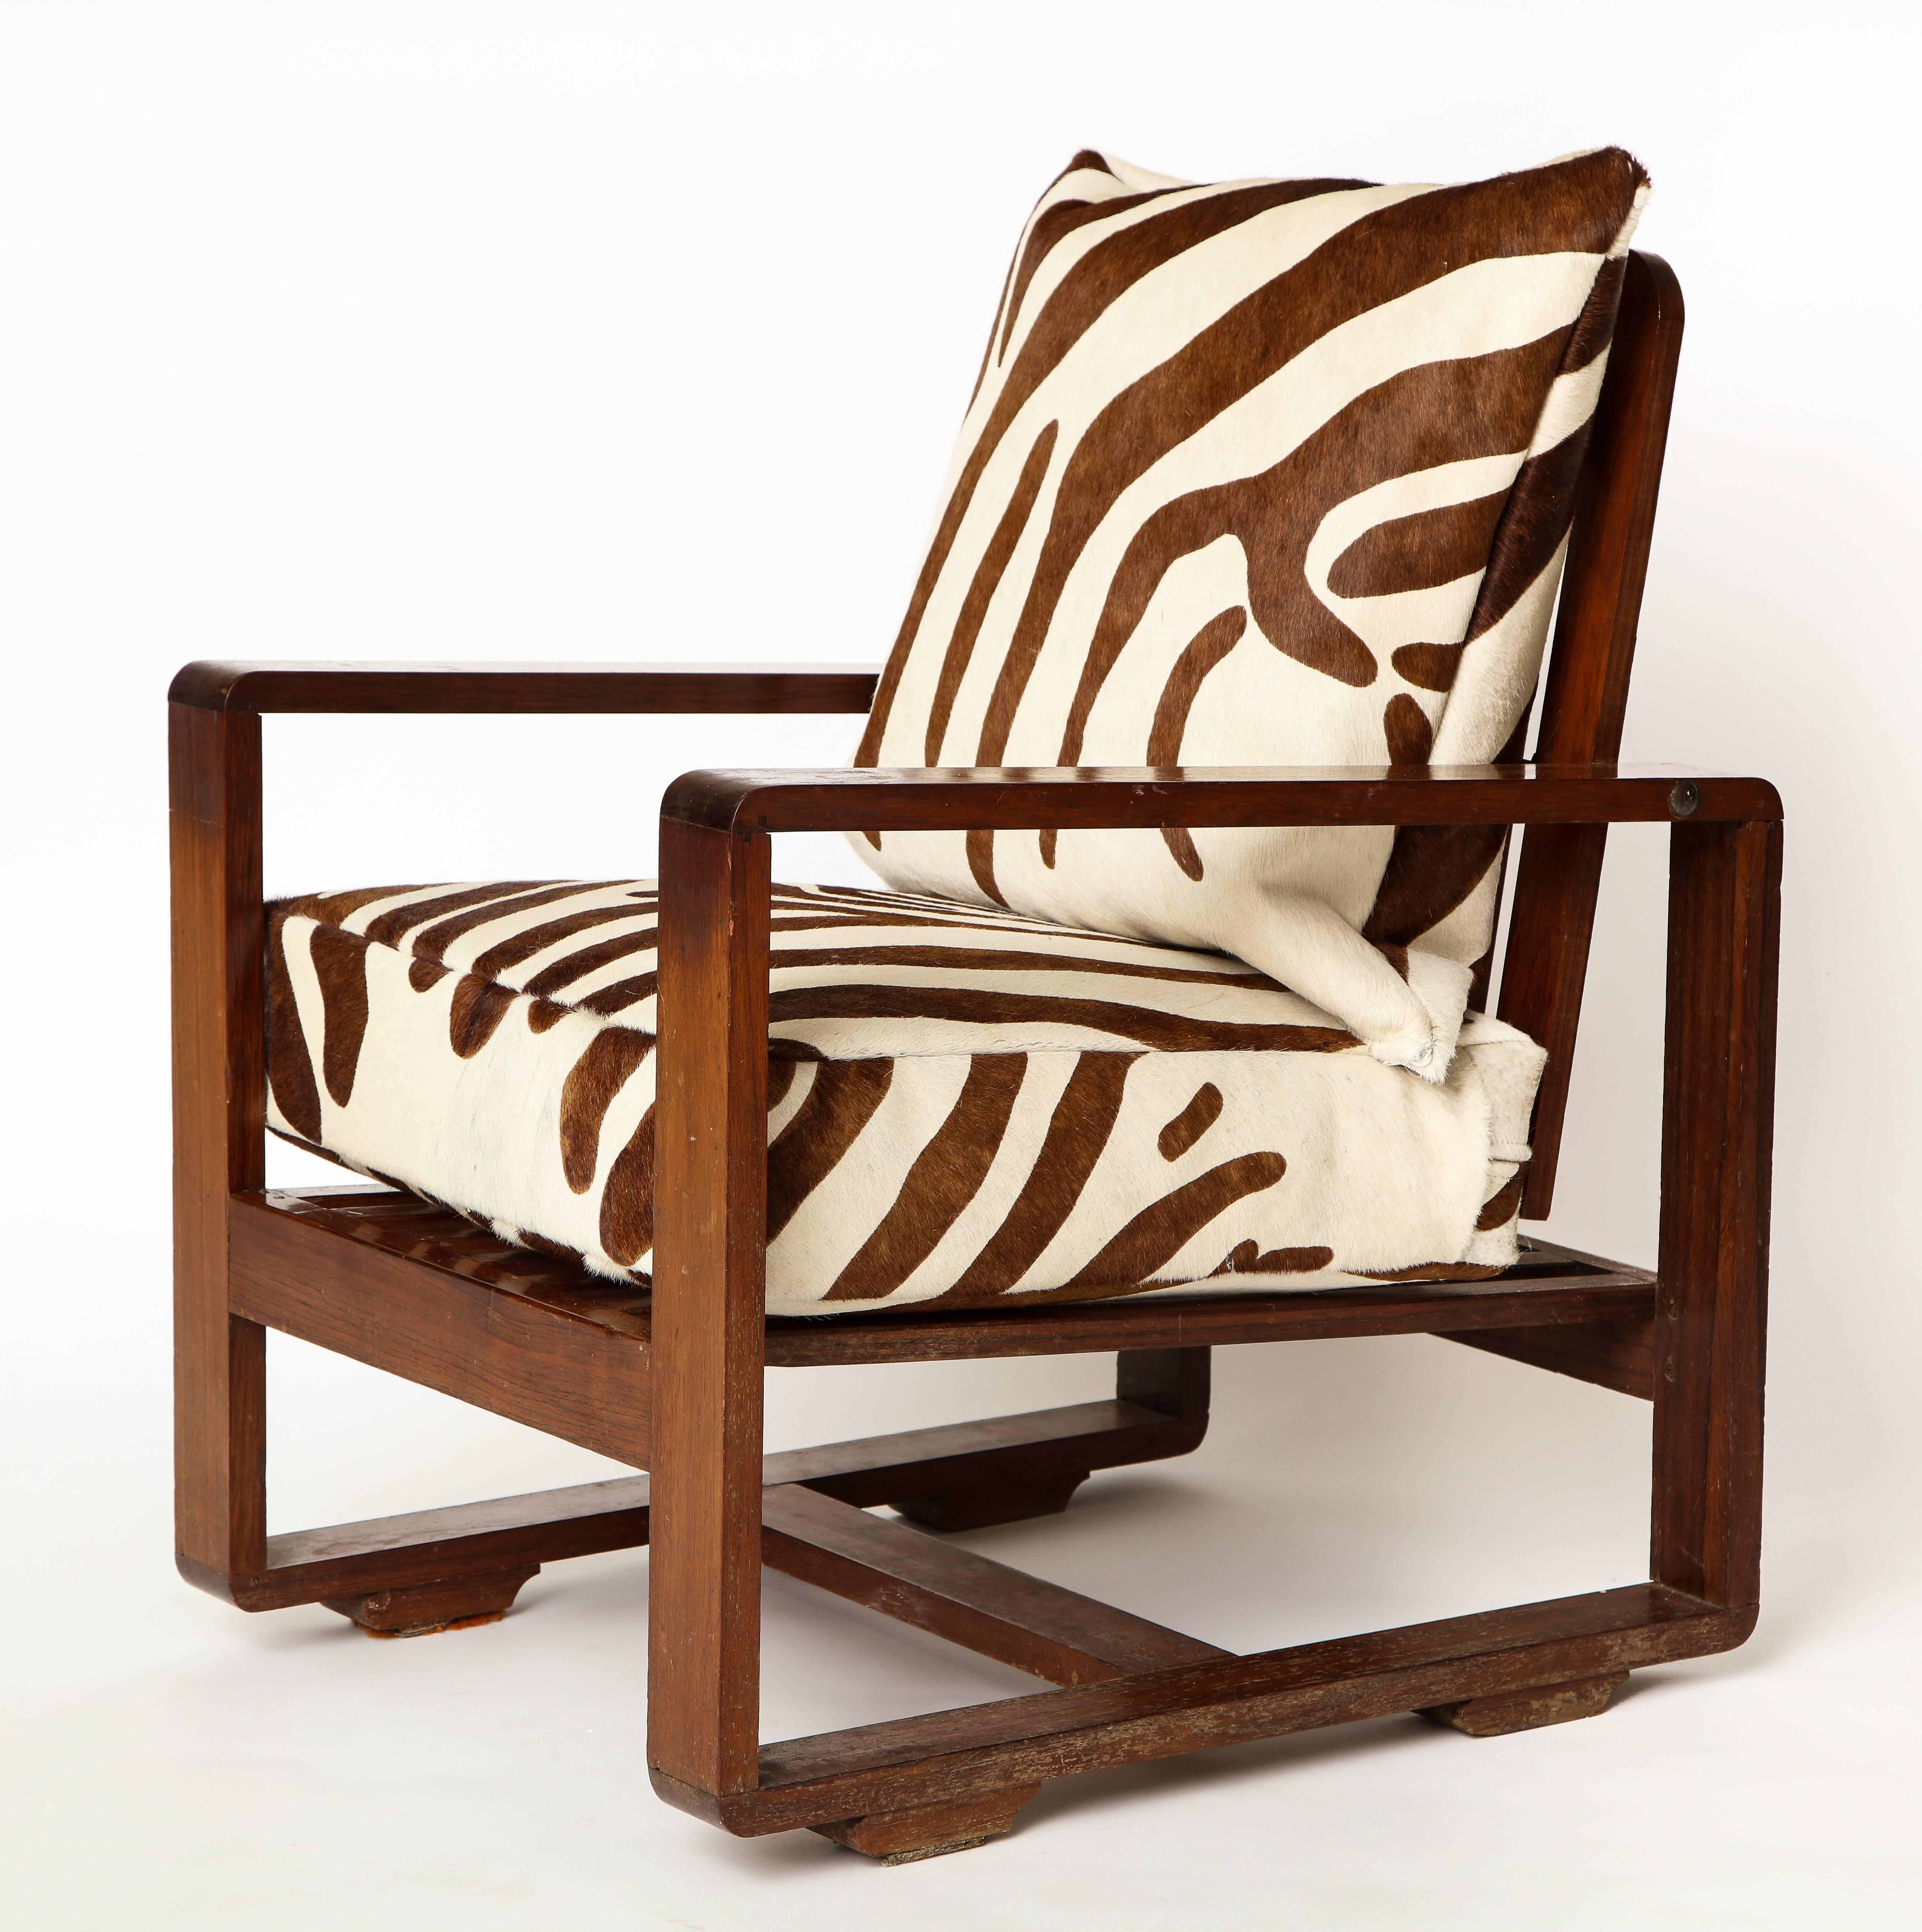 Sornay attributed deco Animal print rosewood lounge chairs, France, 1930s-1940s Mid-Century.

Incredible rosewood chairs with beautiful Patina throughout. Modernist square arms and tilting back. In lovely original condition.
Price is per chair